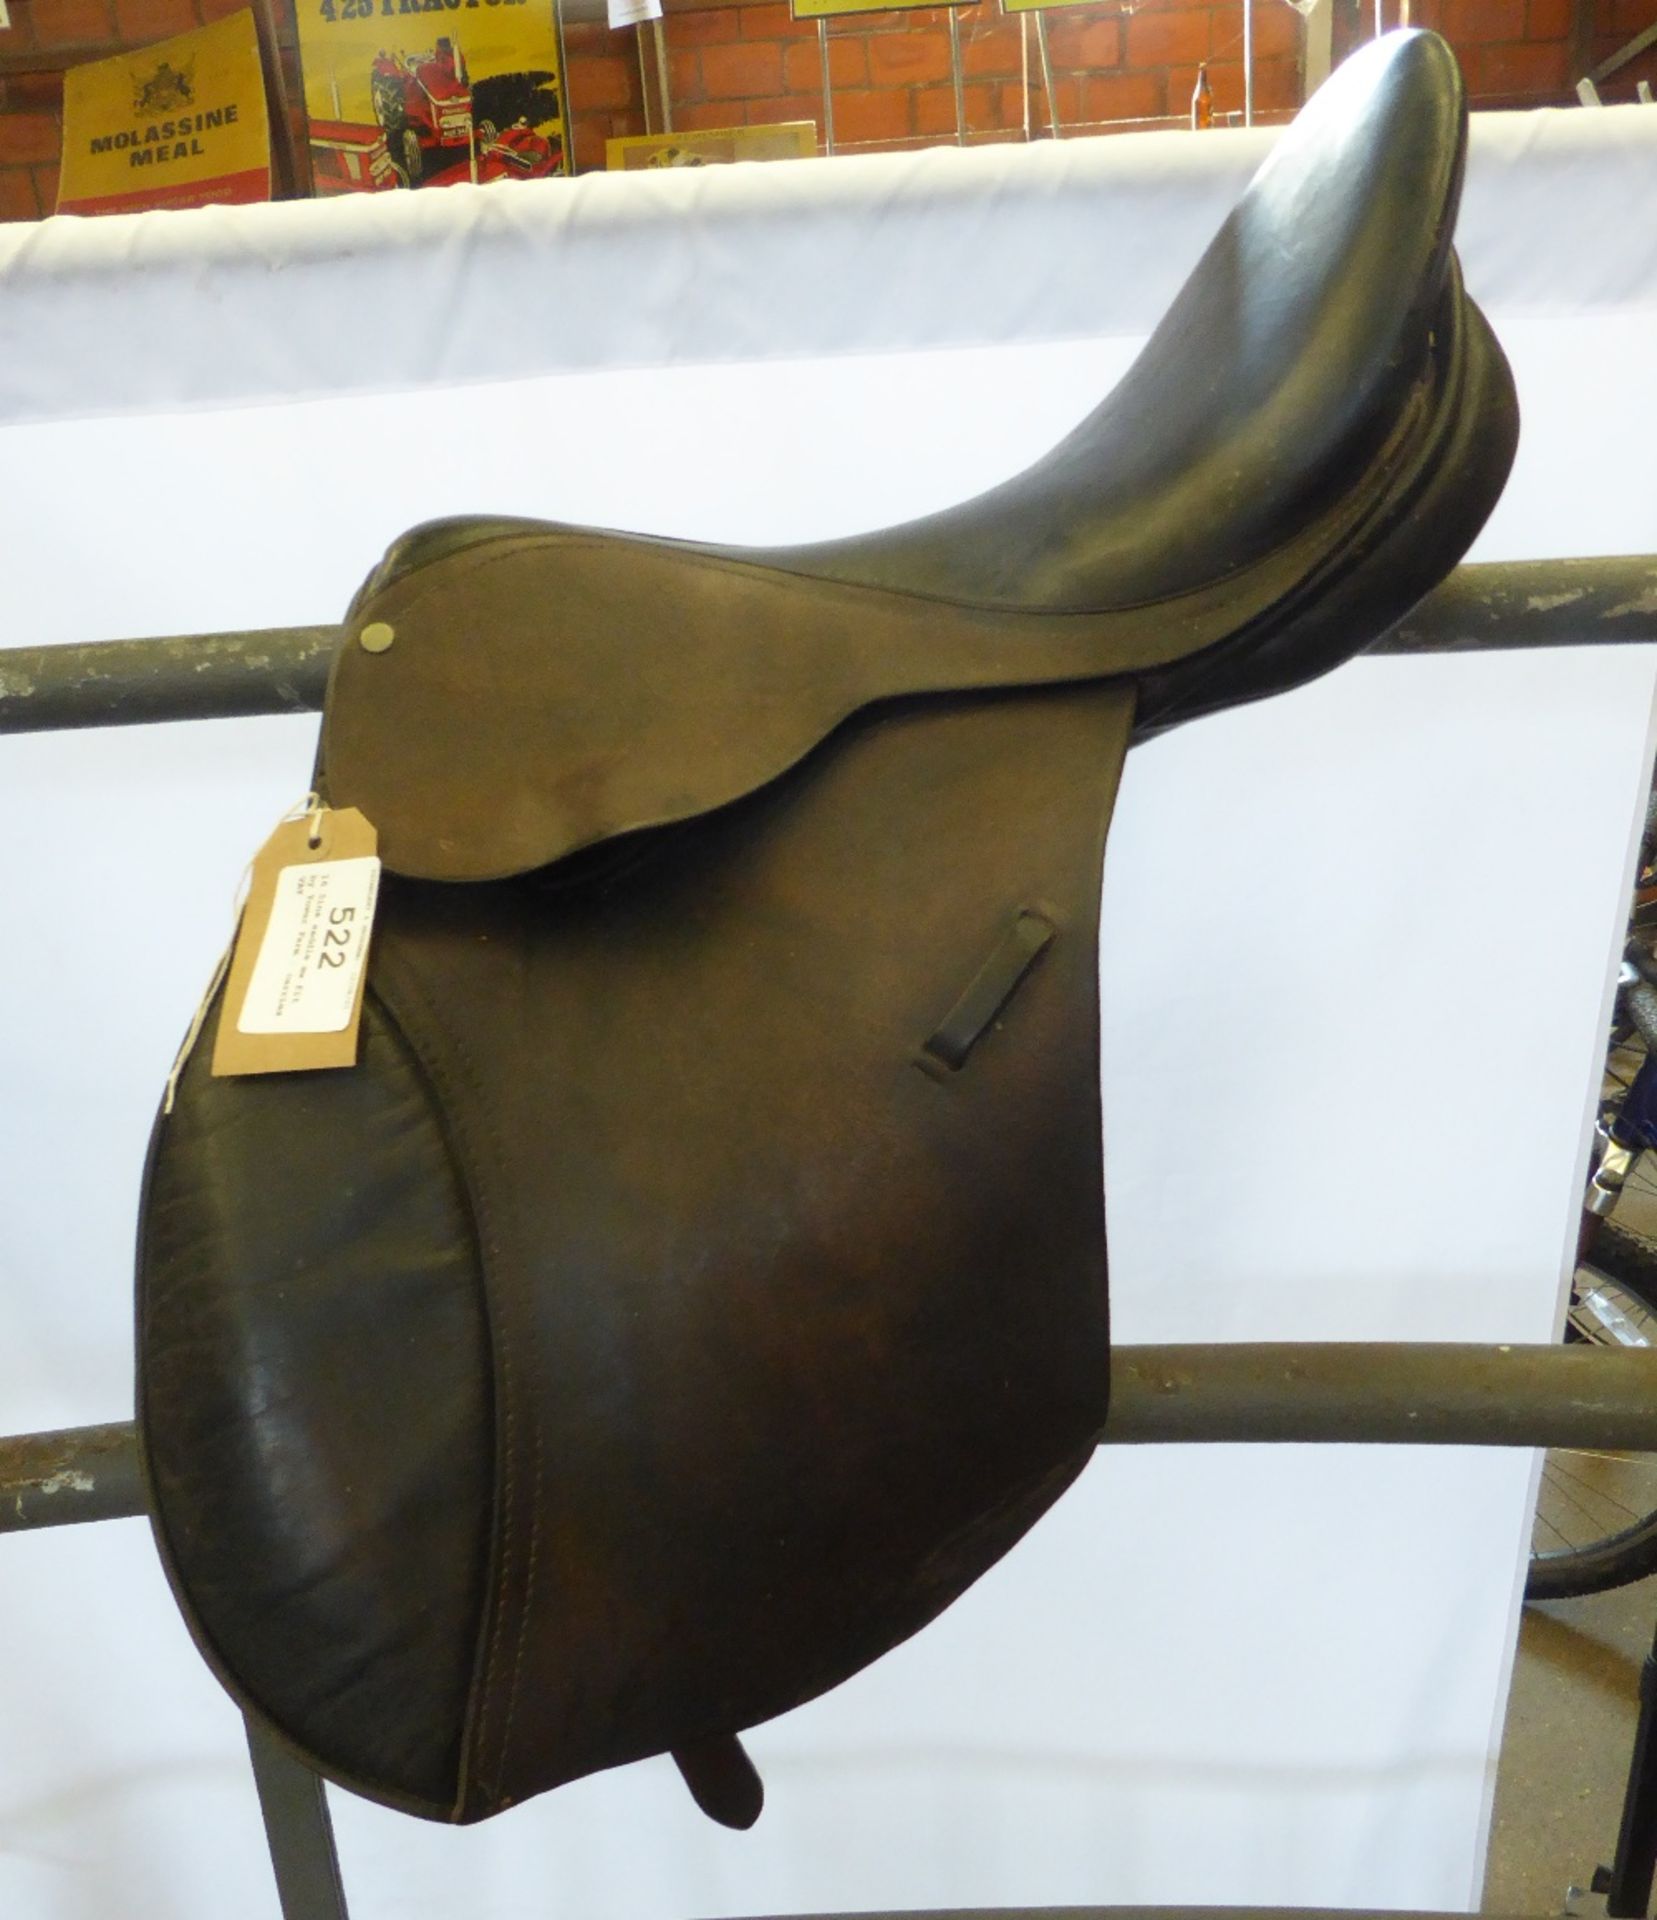 16.5ins saddle mw fit by Tower Farm - carries VAT